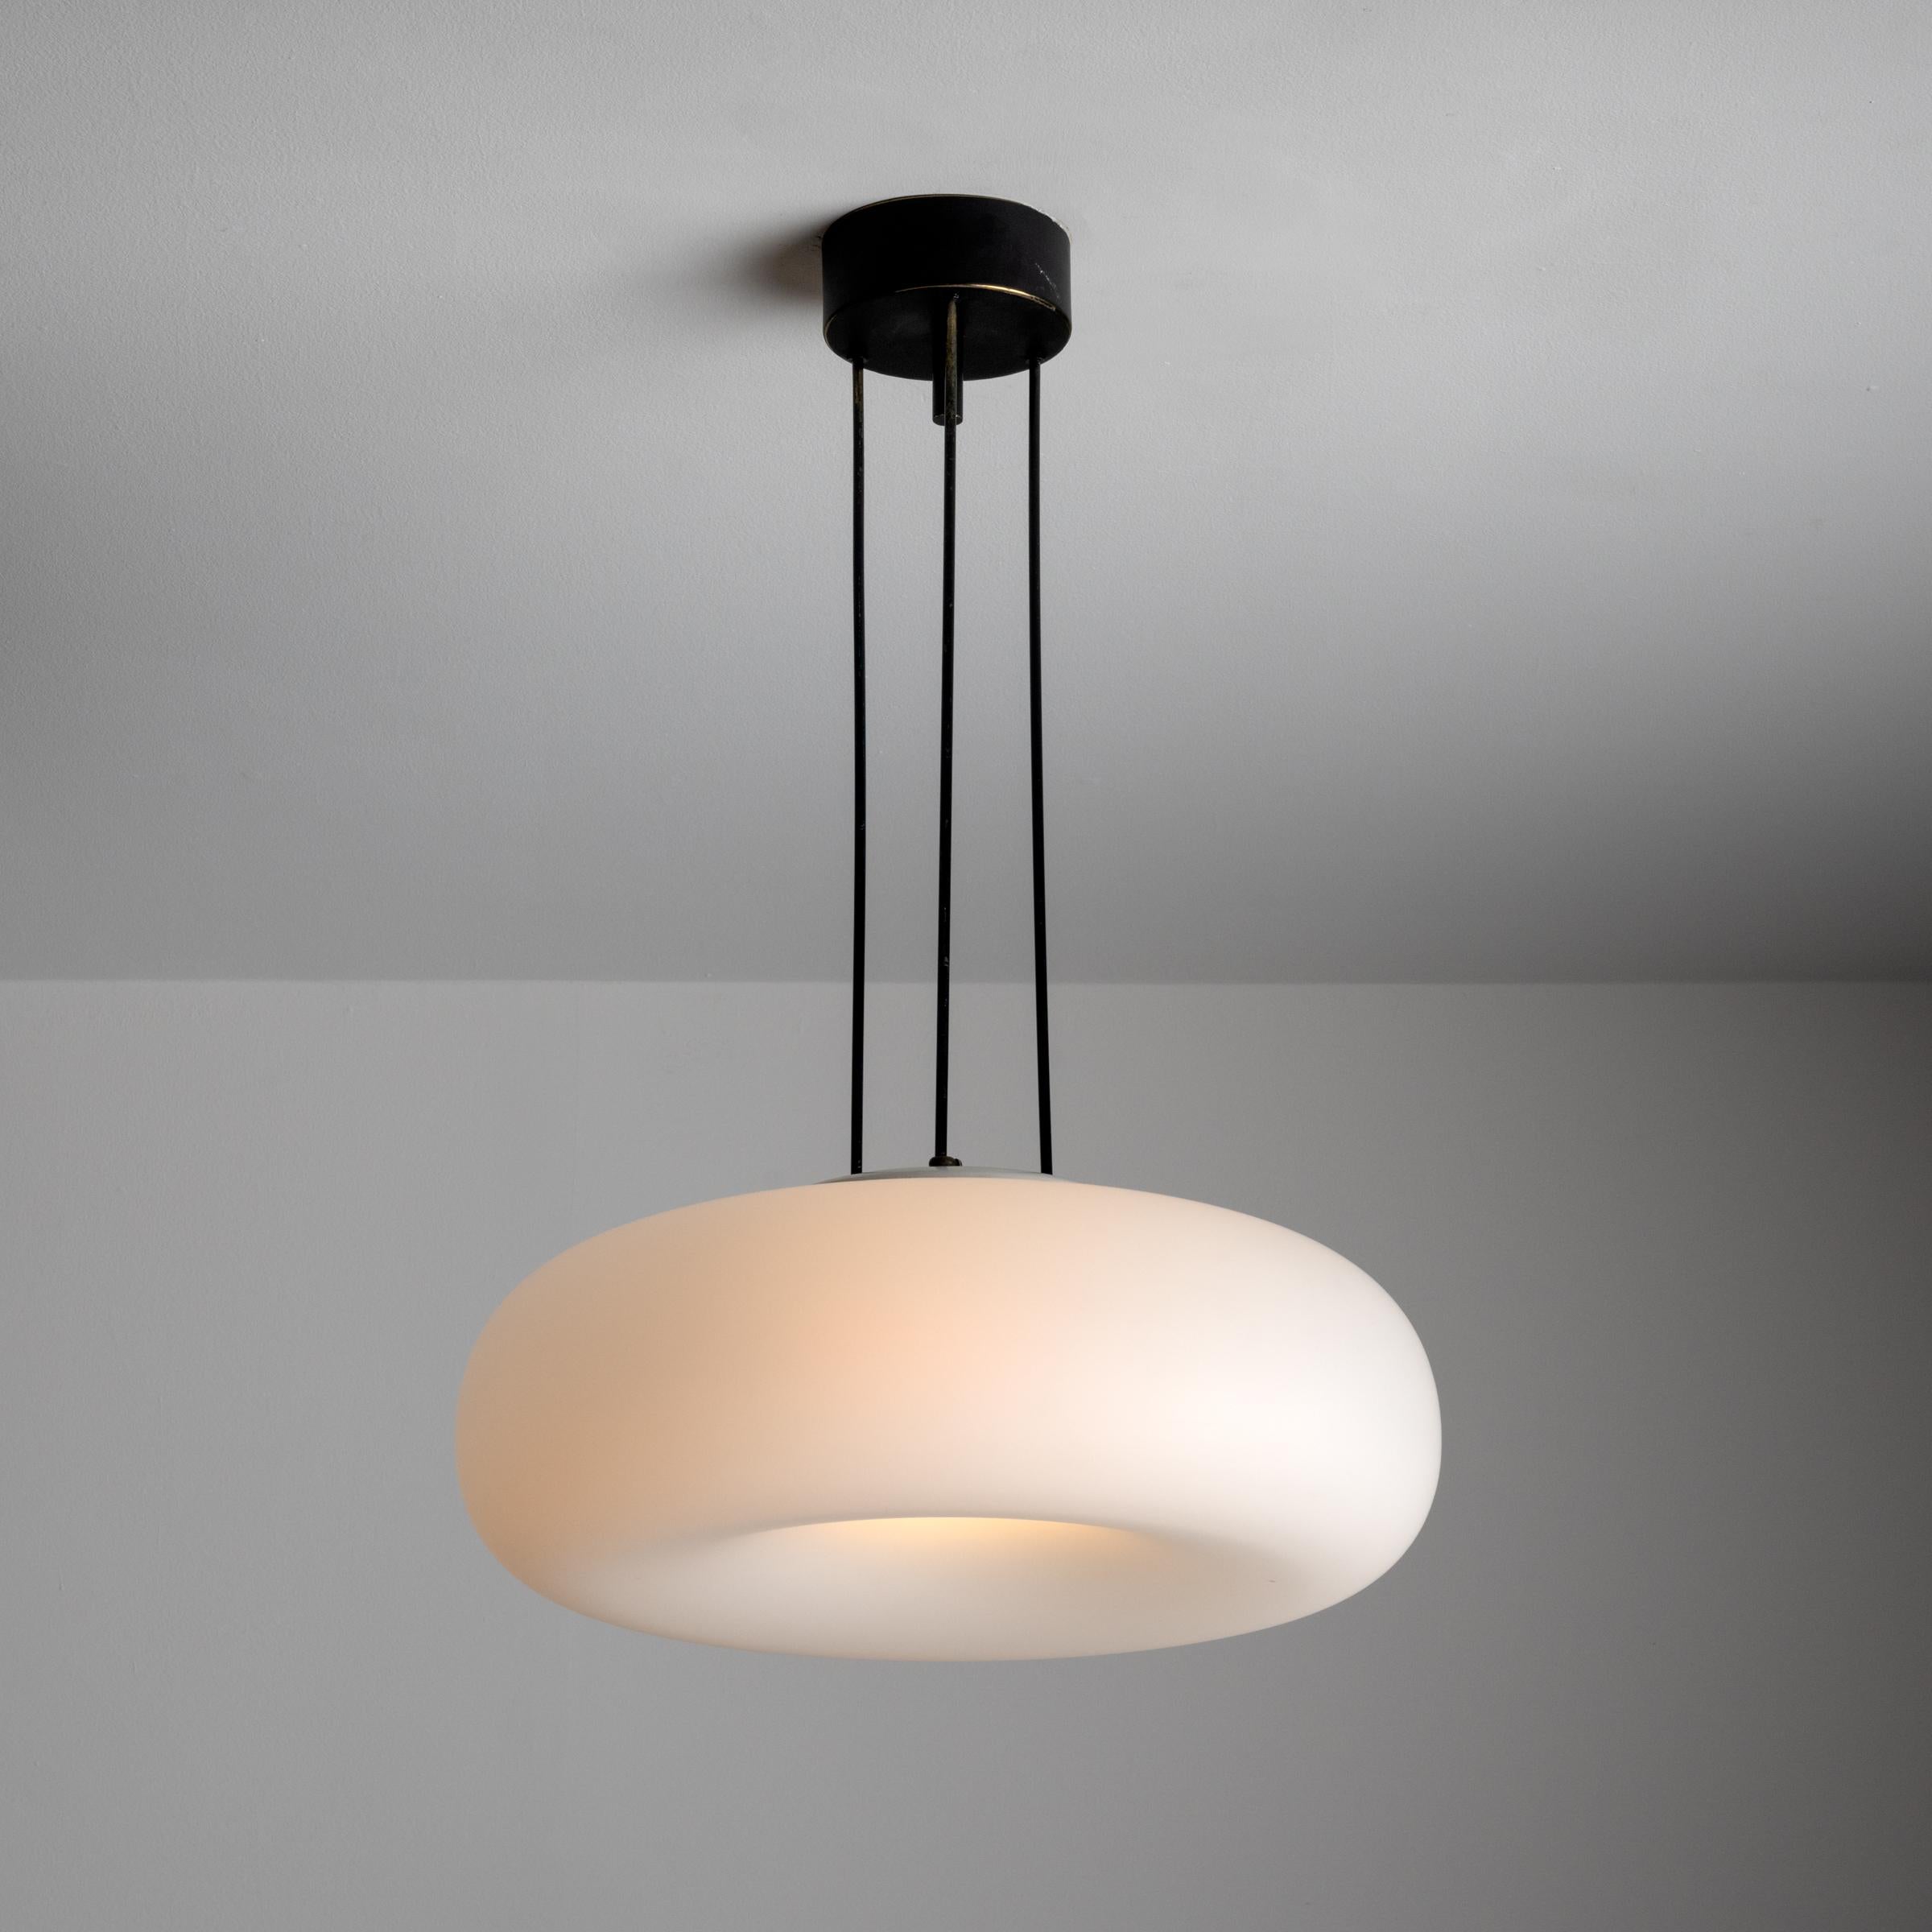 Model 2356 ceiling light by Max Ingrand for Fontana Arte. Designed in Italy in 1967. Features a large frosted glass shade with a concave bottom. Wired for the US. We recommend one E27 base 75w maximum bulb.